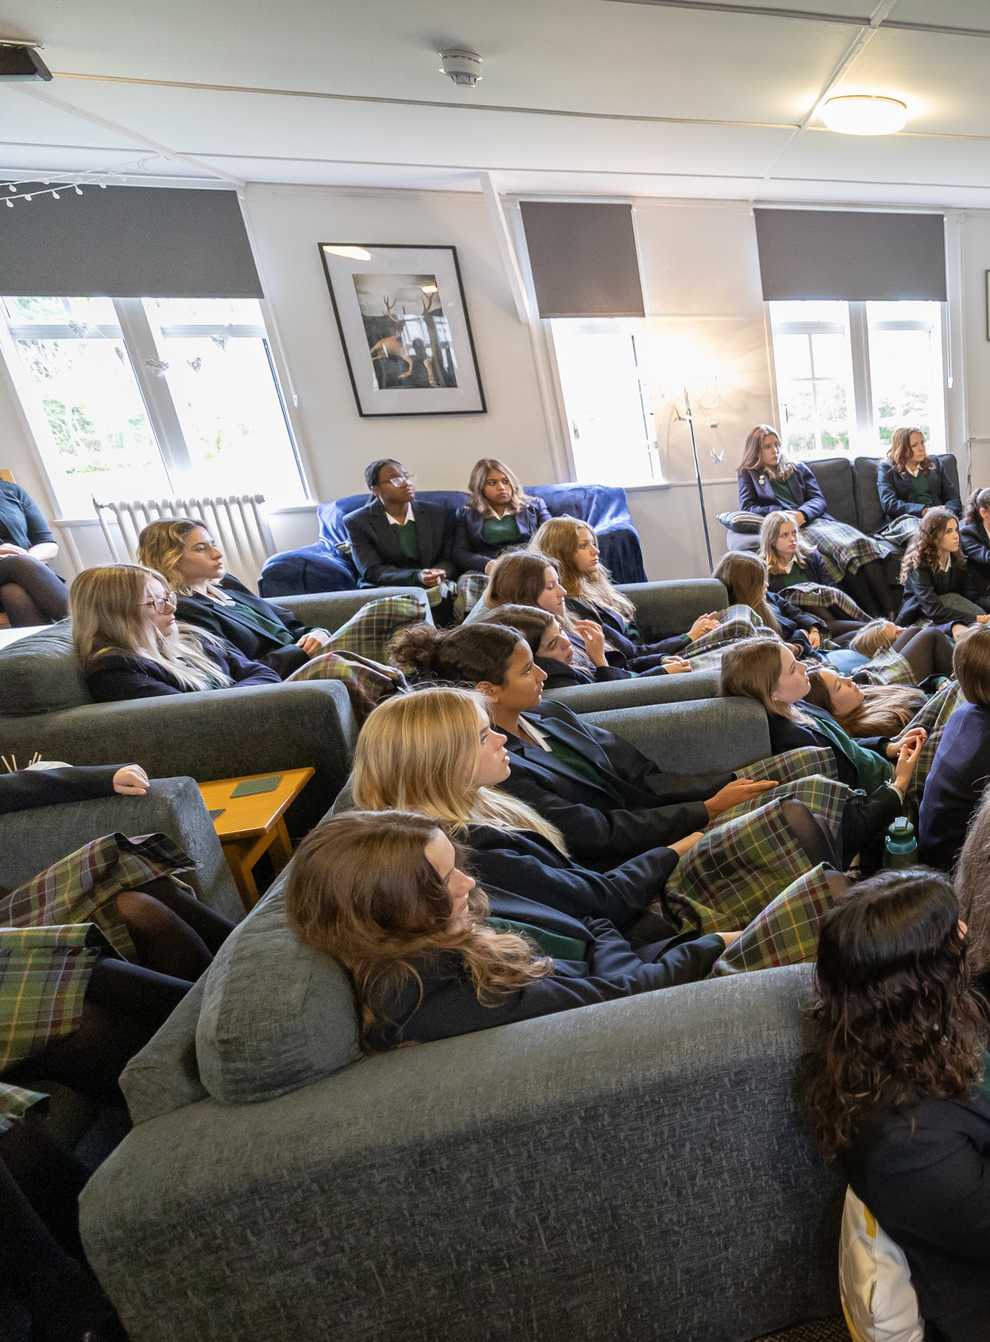 Students watch the state funeral of Queen Elizabeth II in their boarding house, Windmill Lodge, at Gordonstoun School (Paul Campbell/PA)